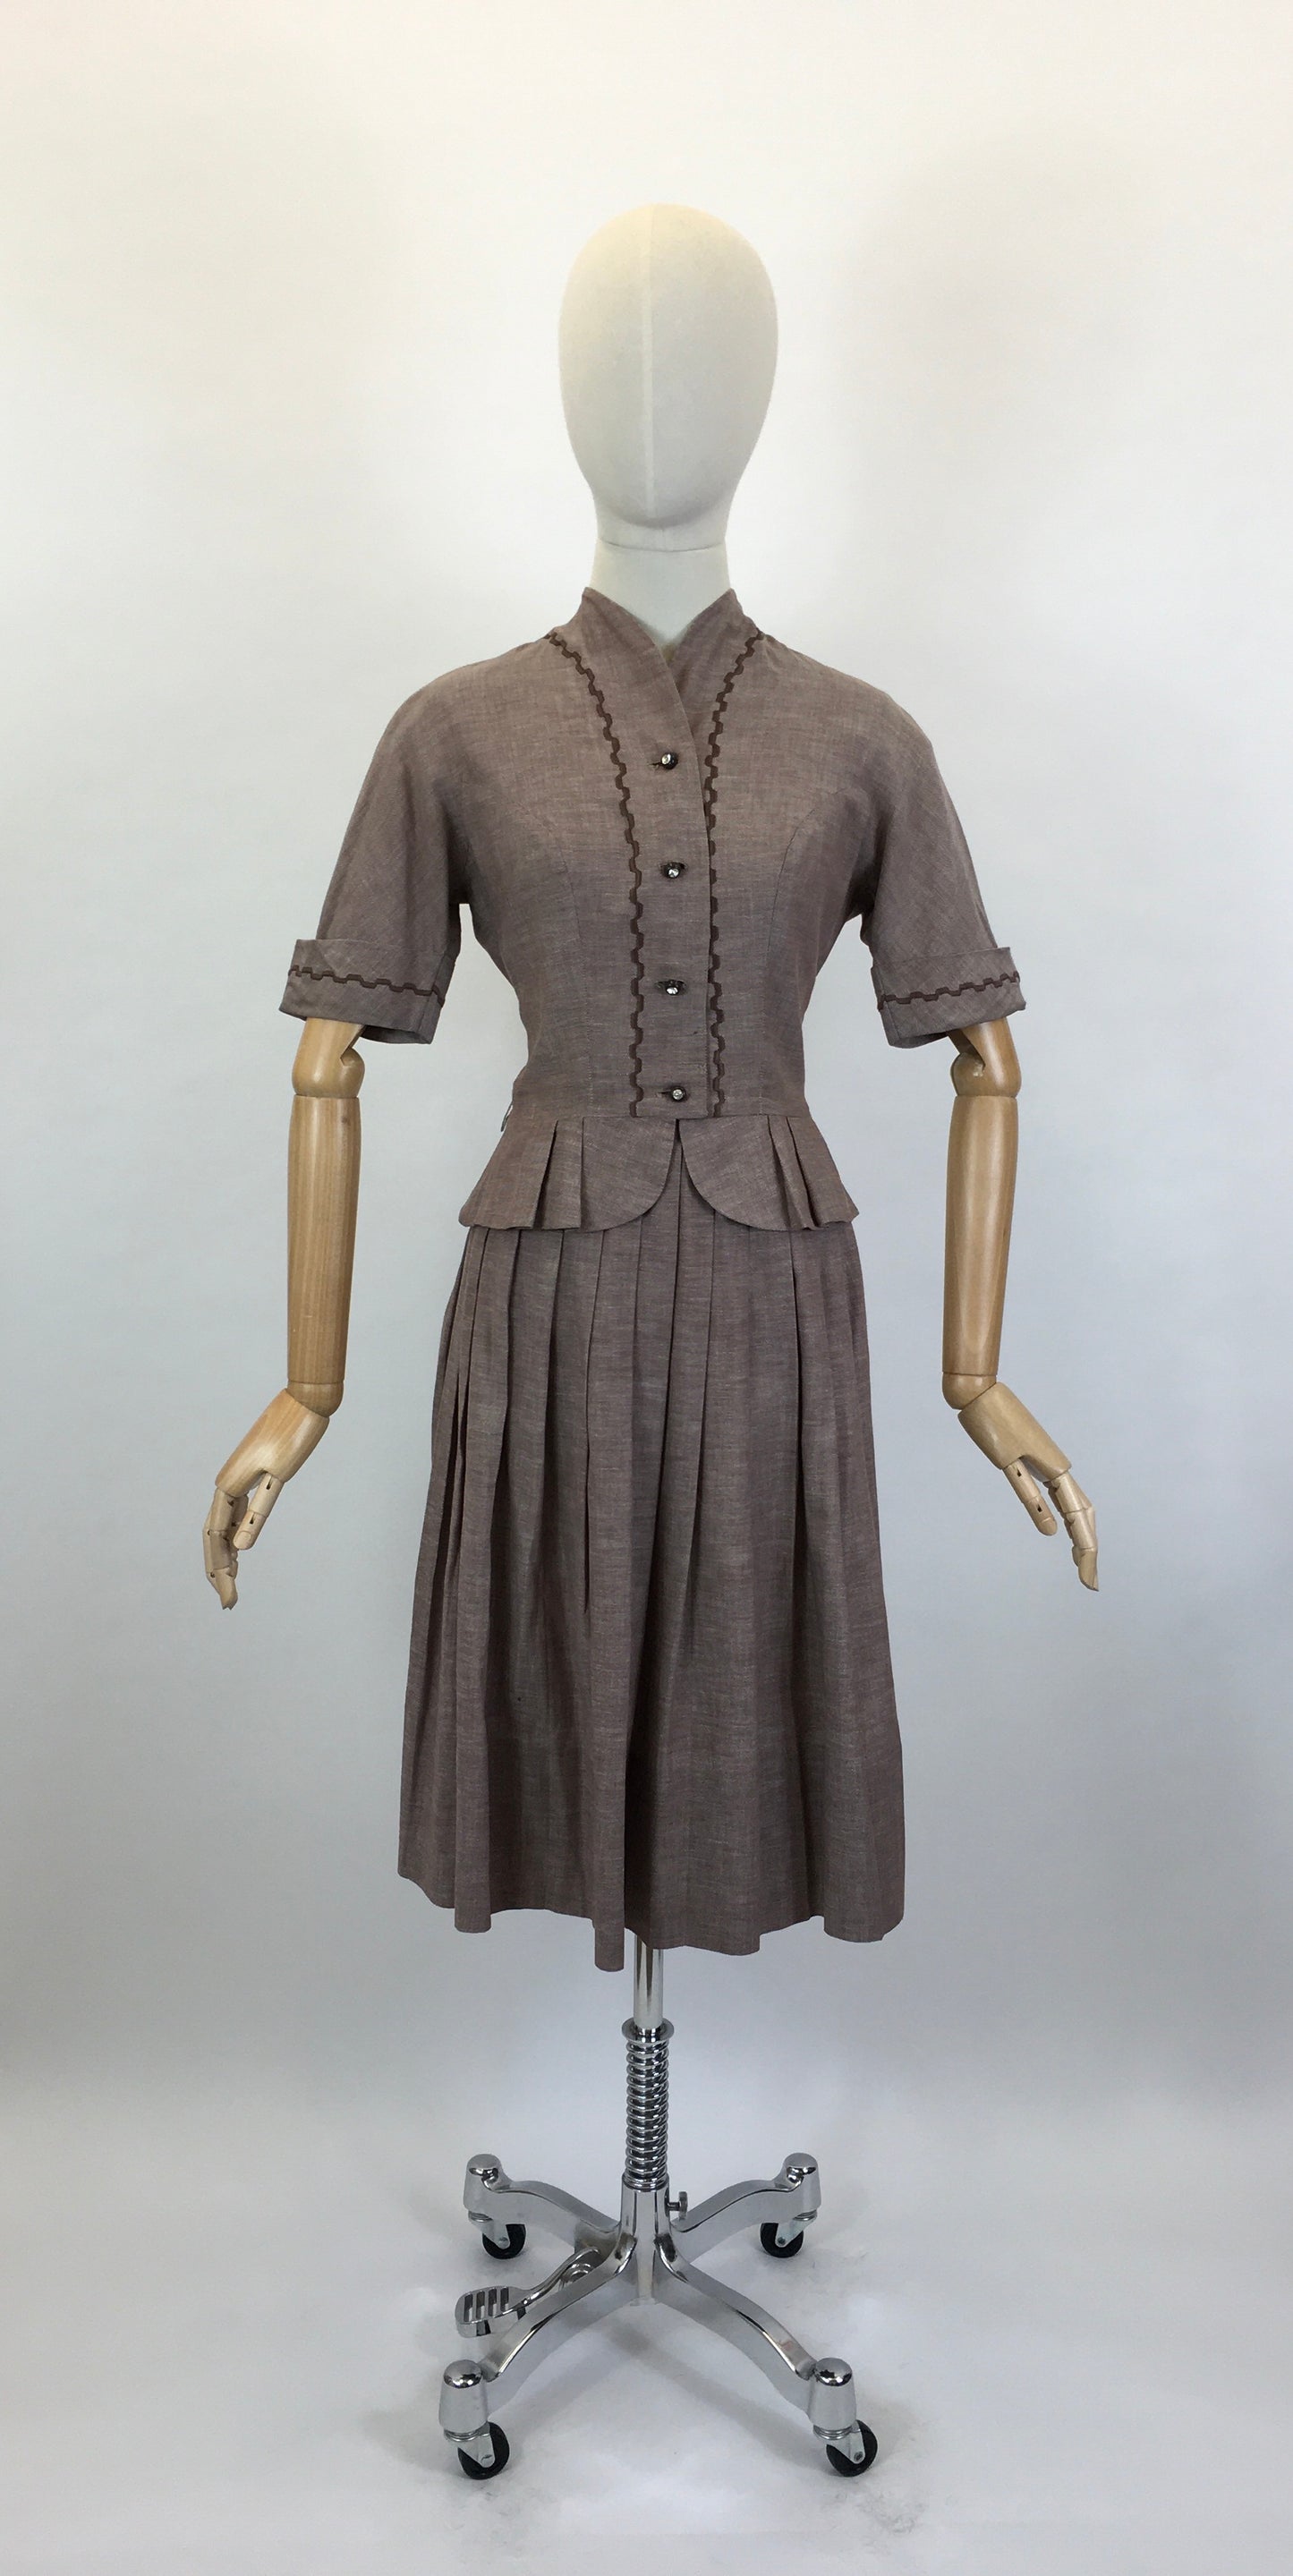 Original 1940’s Darling 2pc Summer Suit - In A Lightweight Soft Brown Cotton With Stunning Details